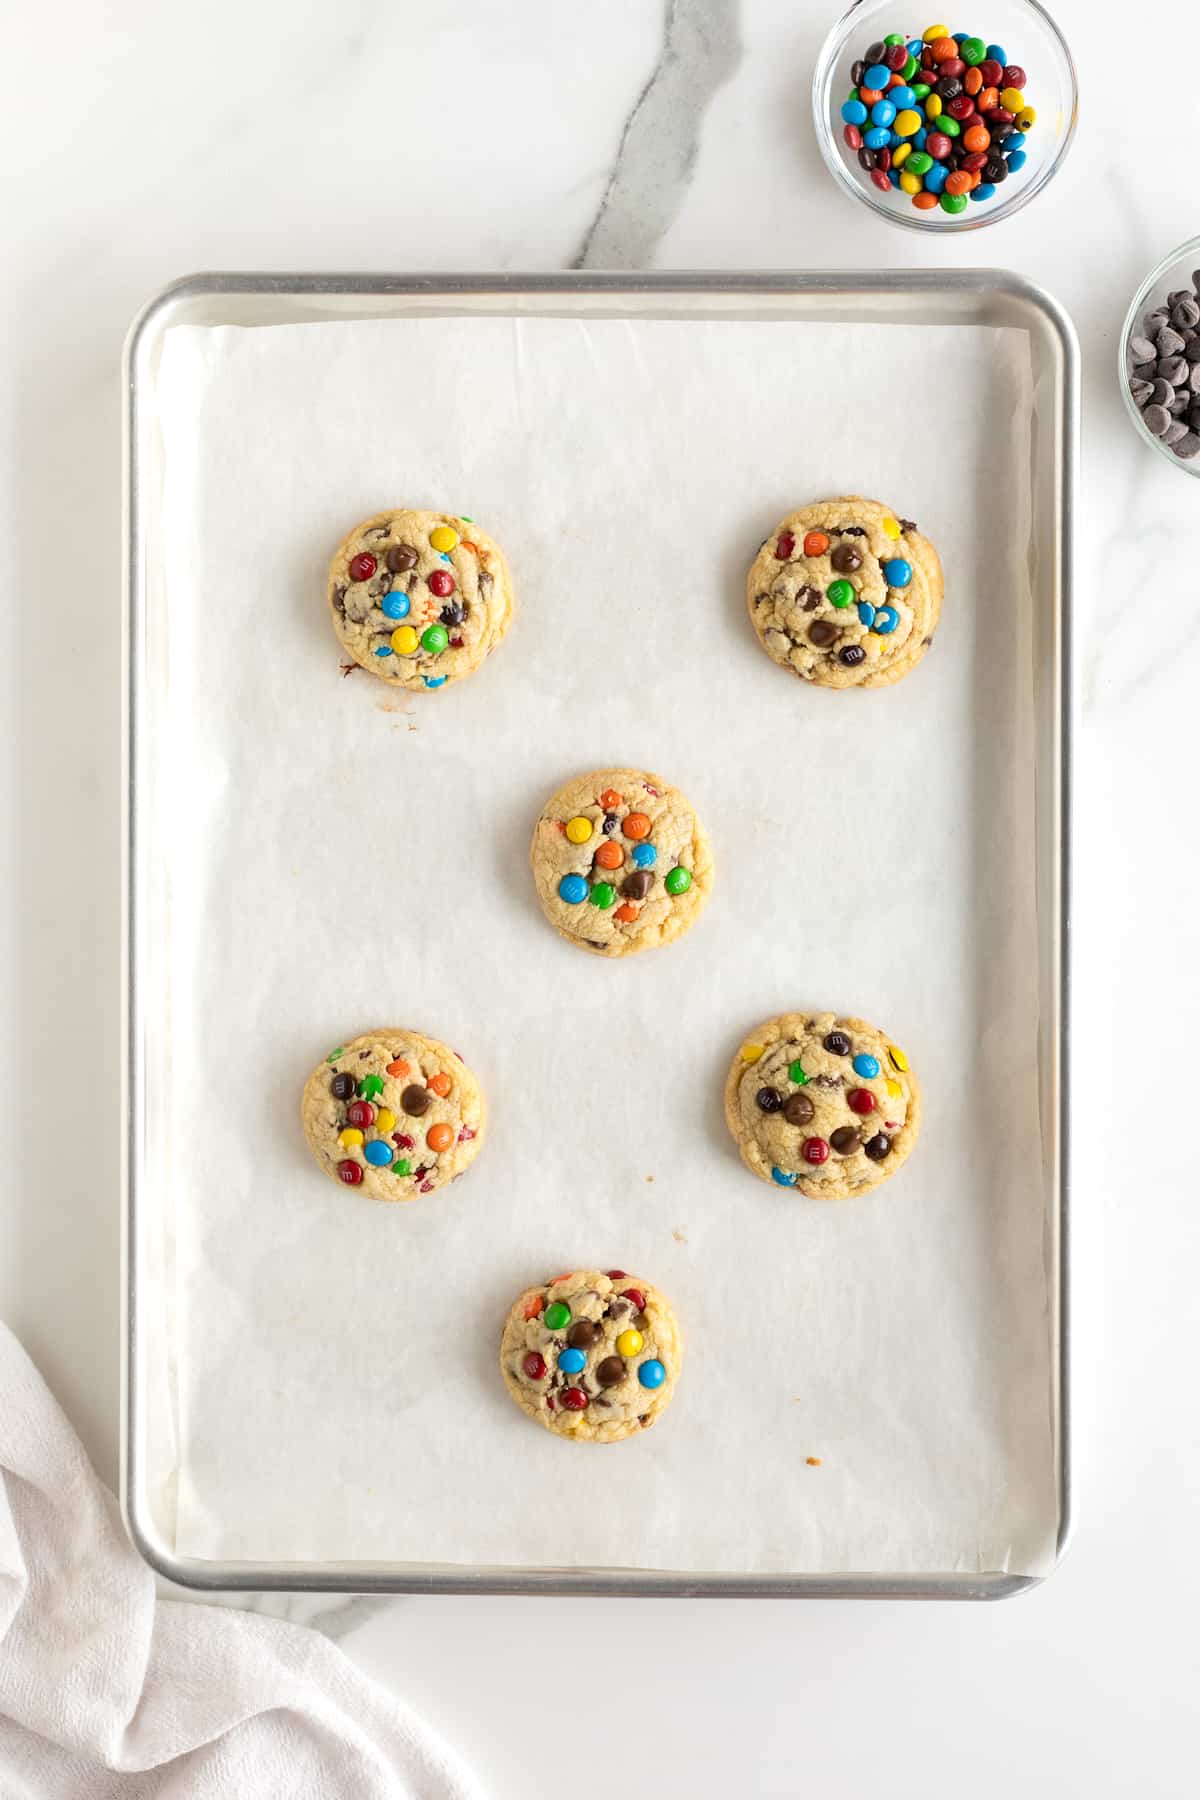 Baked M&M chocolate chip cookies on a parchment lined baking sheet.